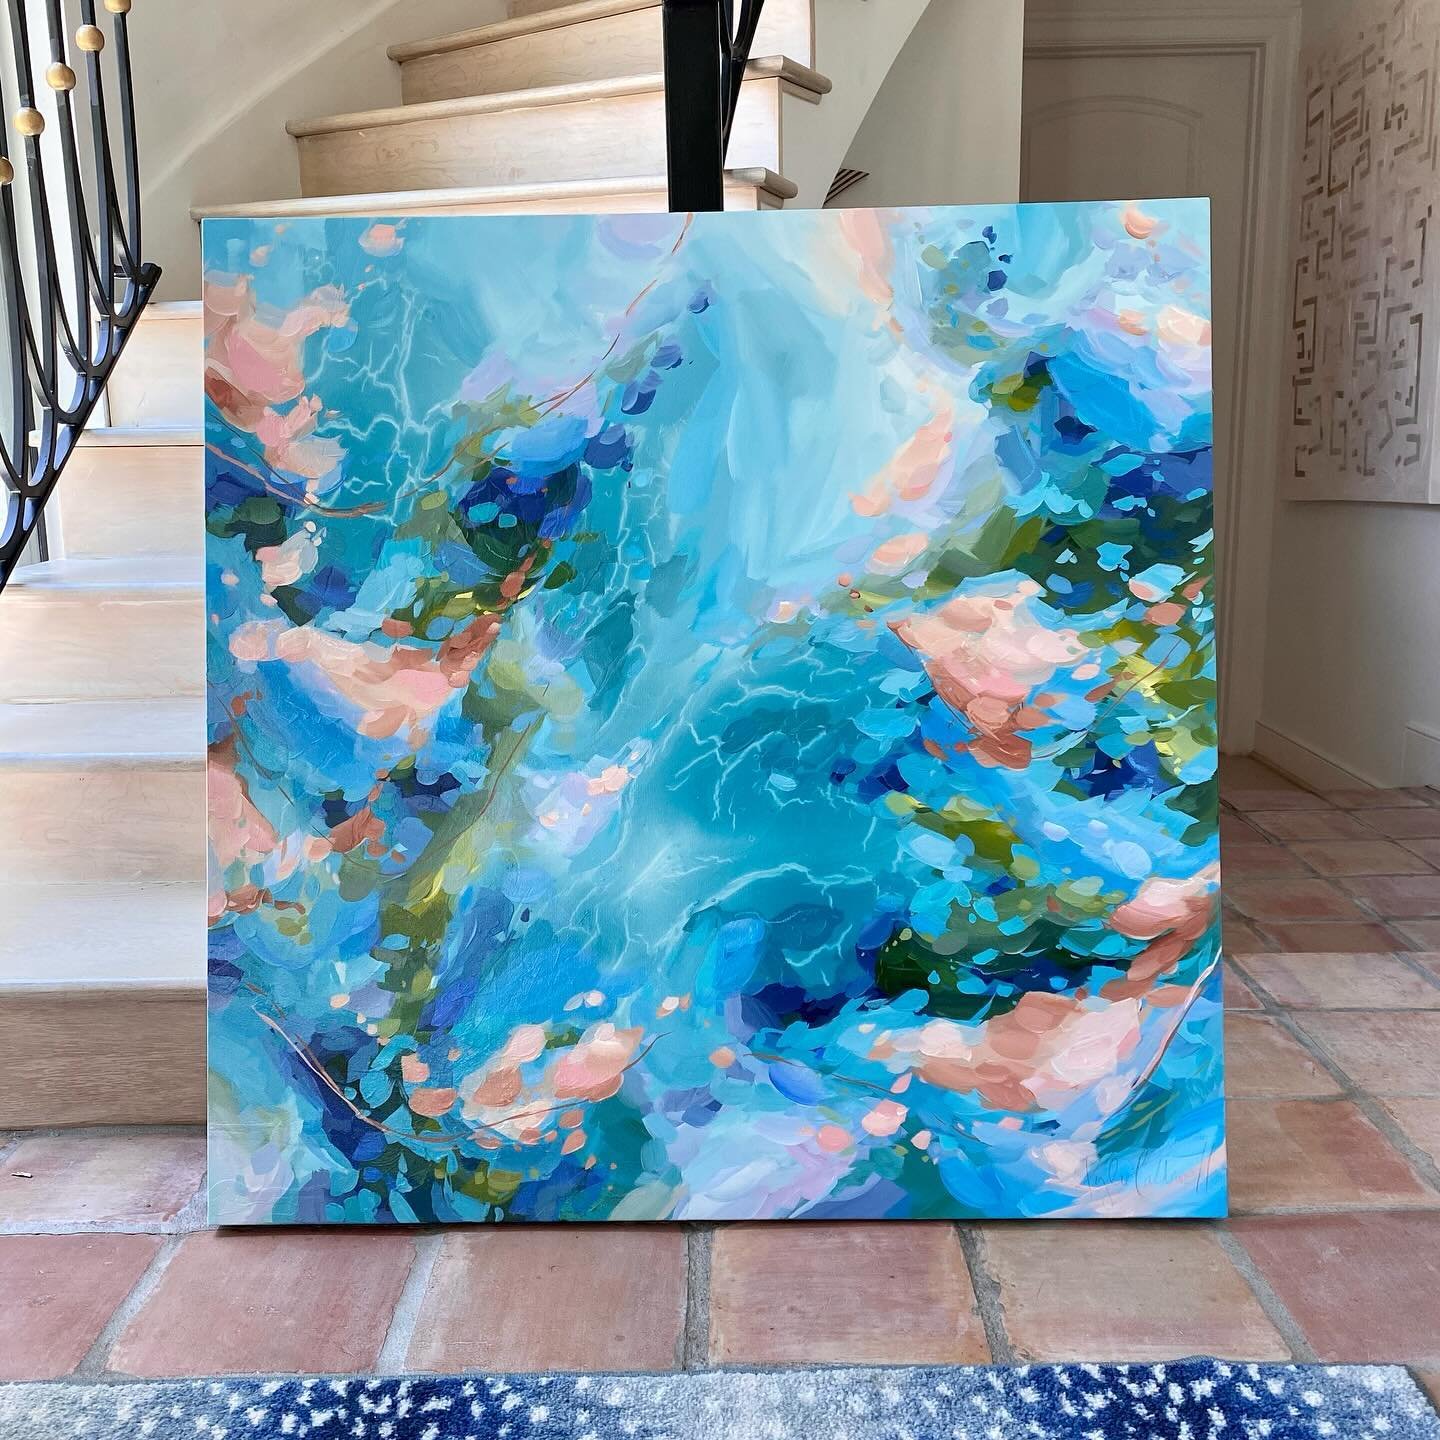 This birthday surprise painting is giving so much positive energy! 🎉 💙🩵🤗